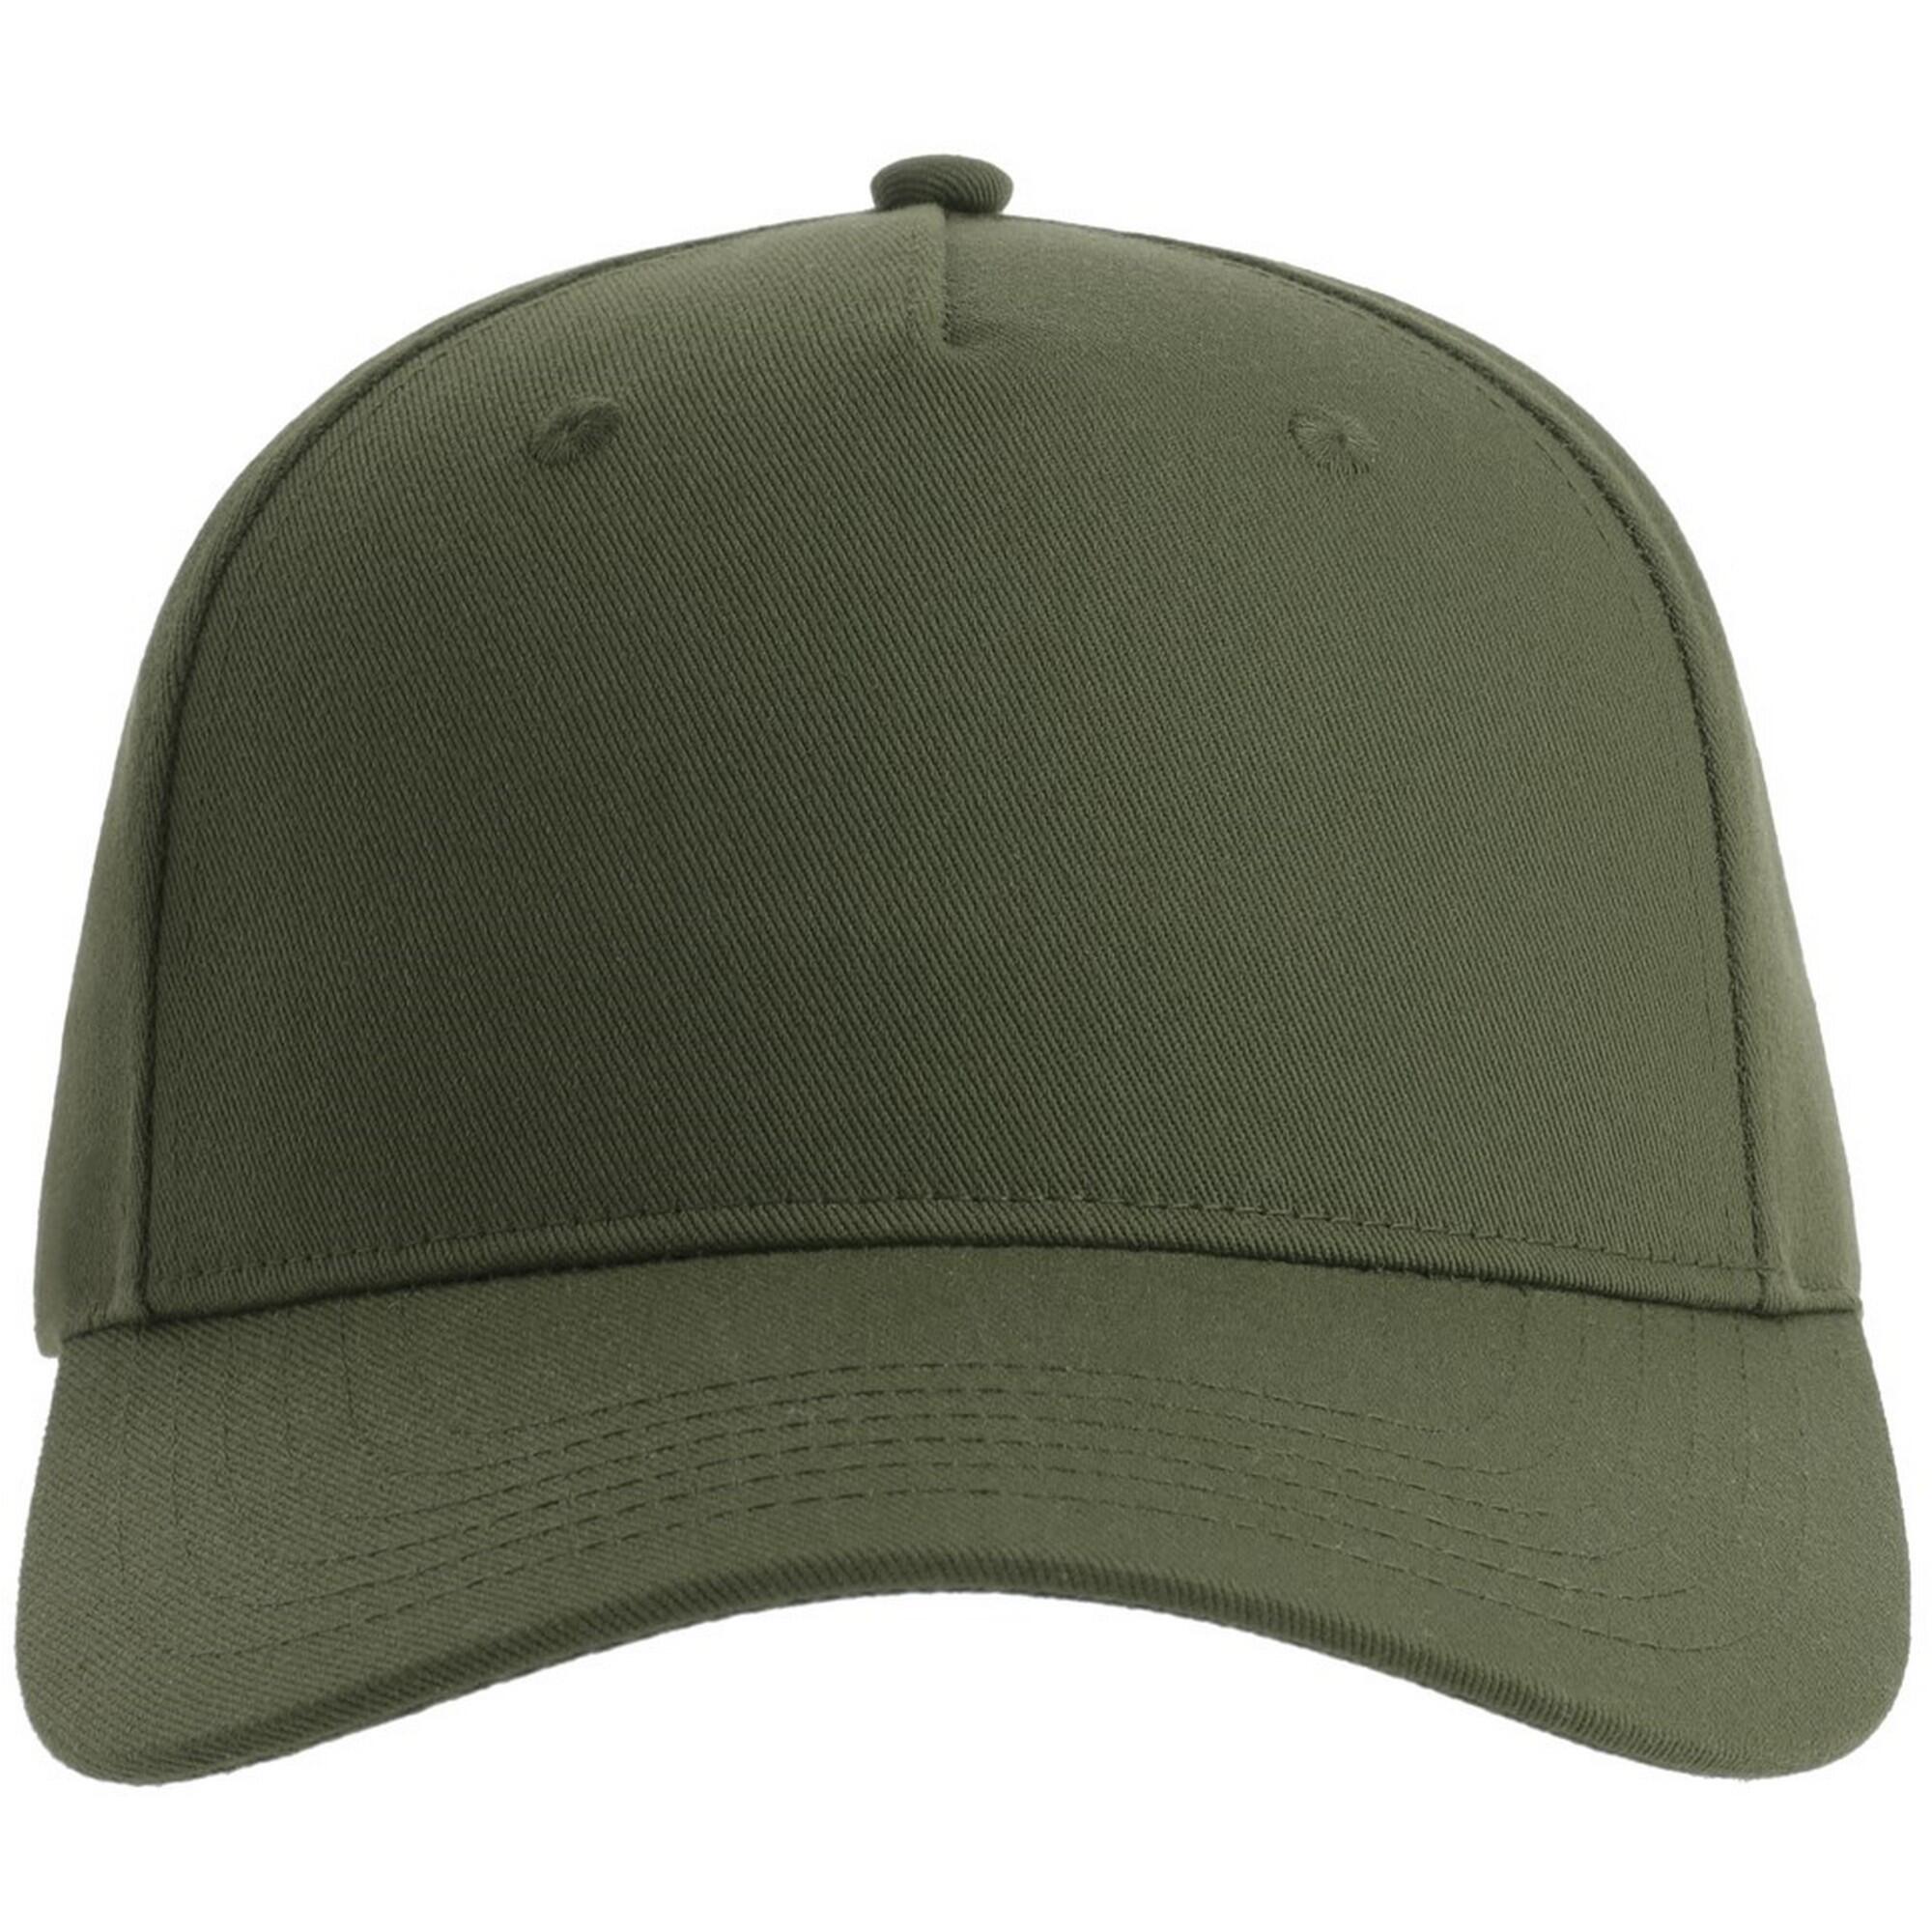 Unisex Adult Fiji Recycled Polyester Cap (Olive) 2/3